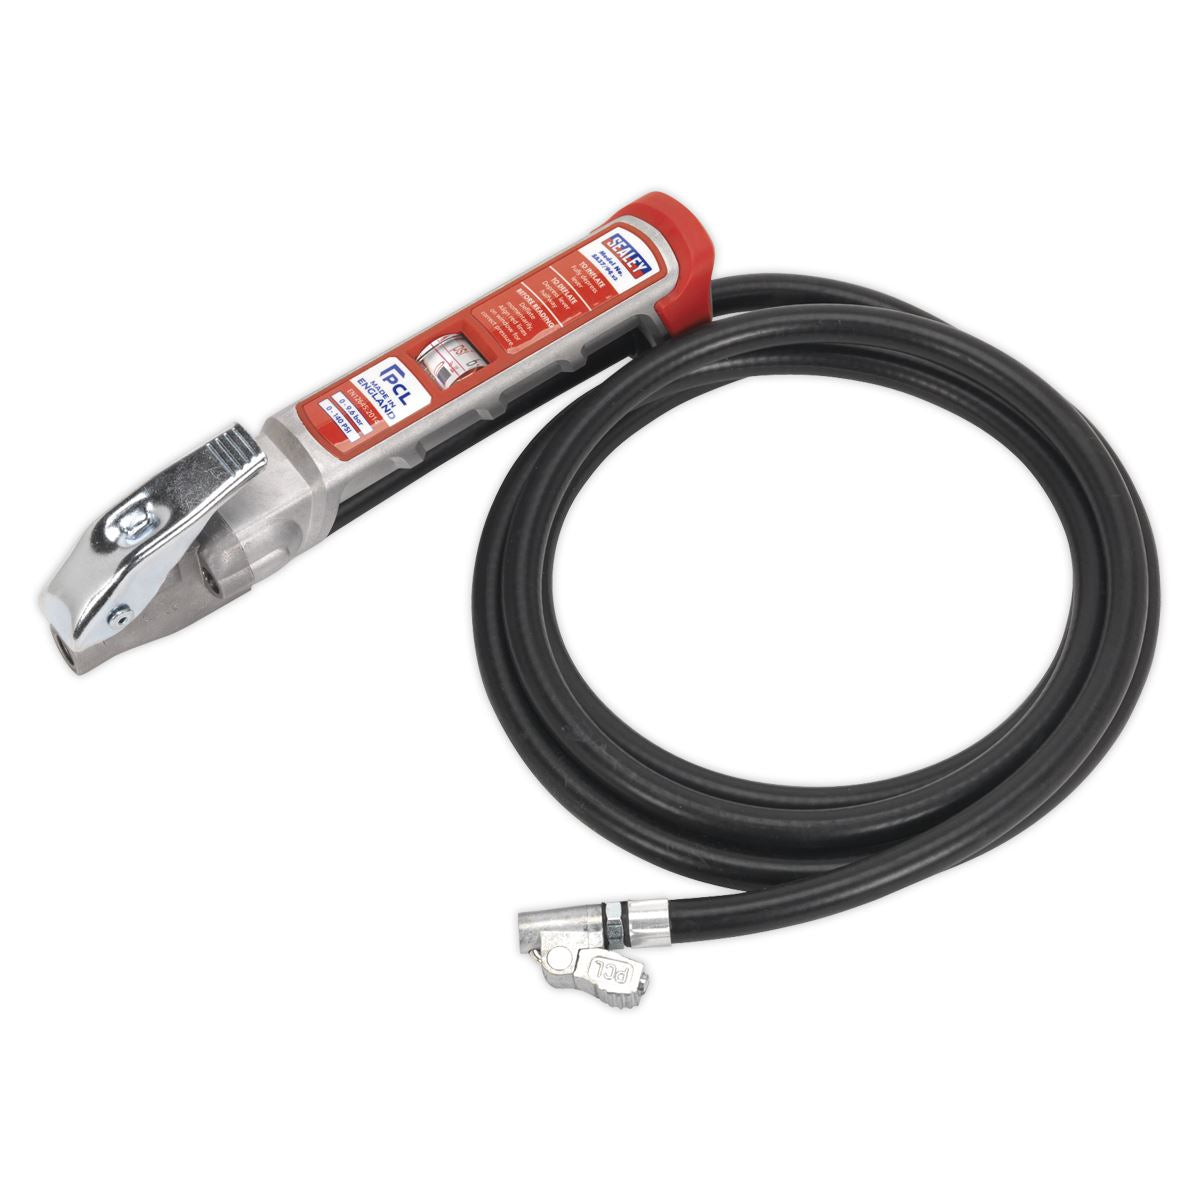 PCL Professional Tyre Inflator with 2.5m Hose & Clip-On Connector